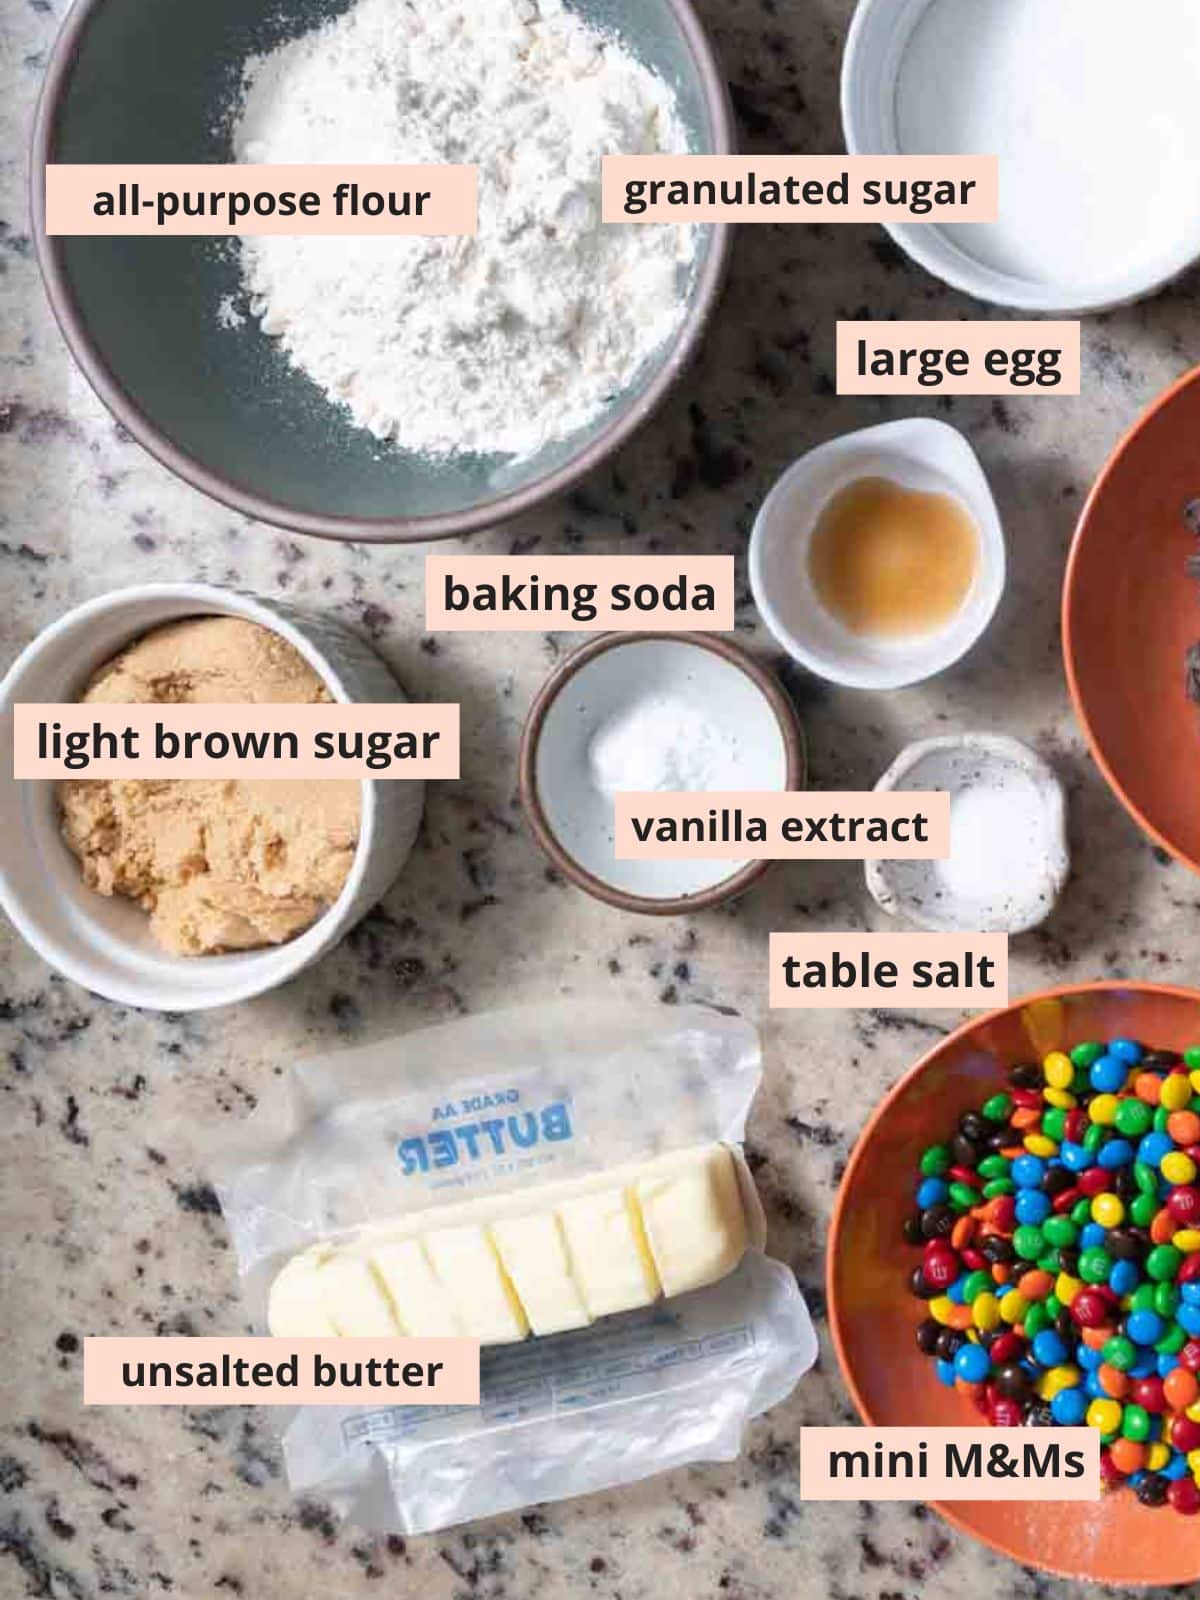 Labeled ingredients made to make cookies.